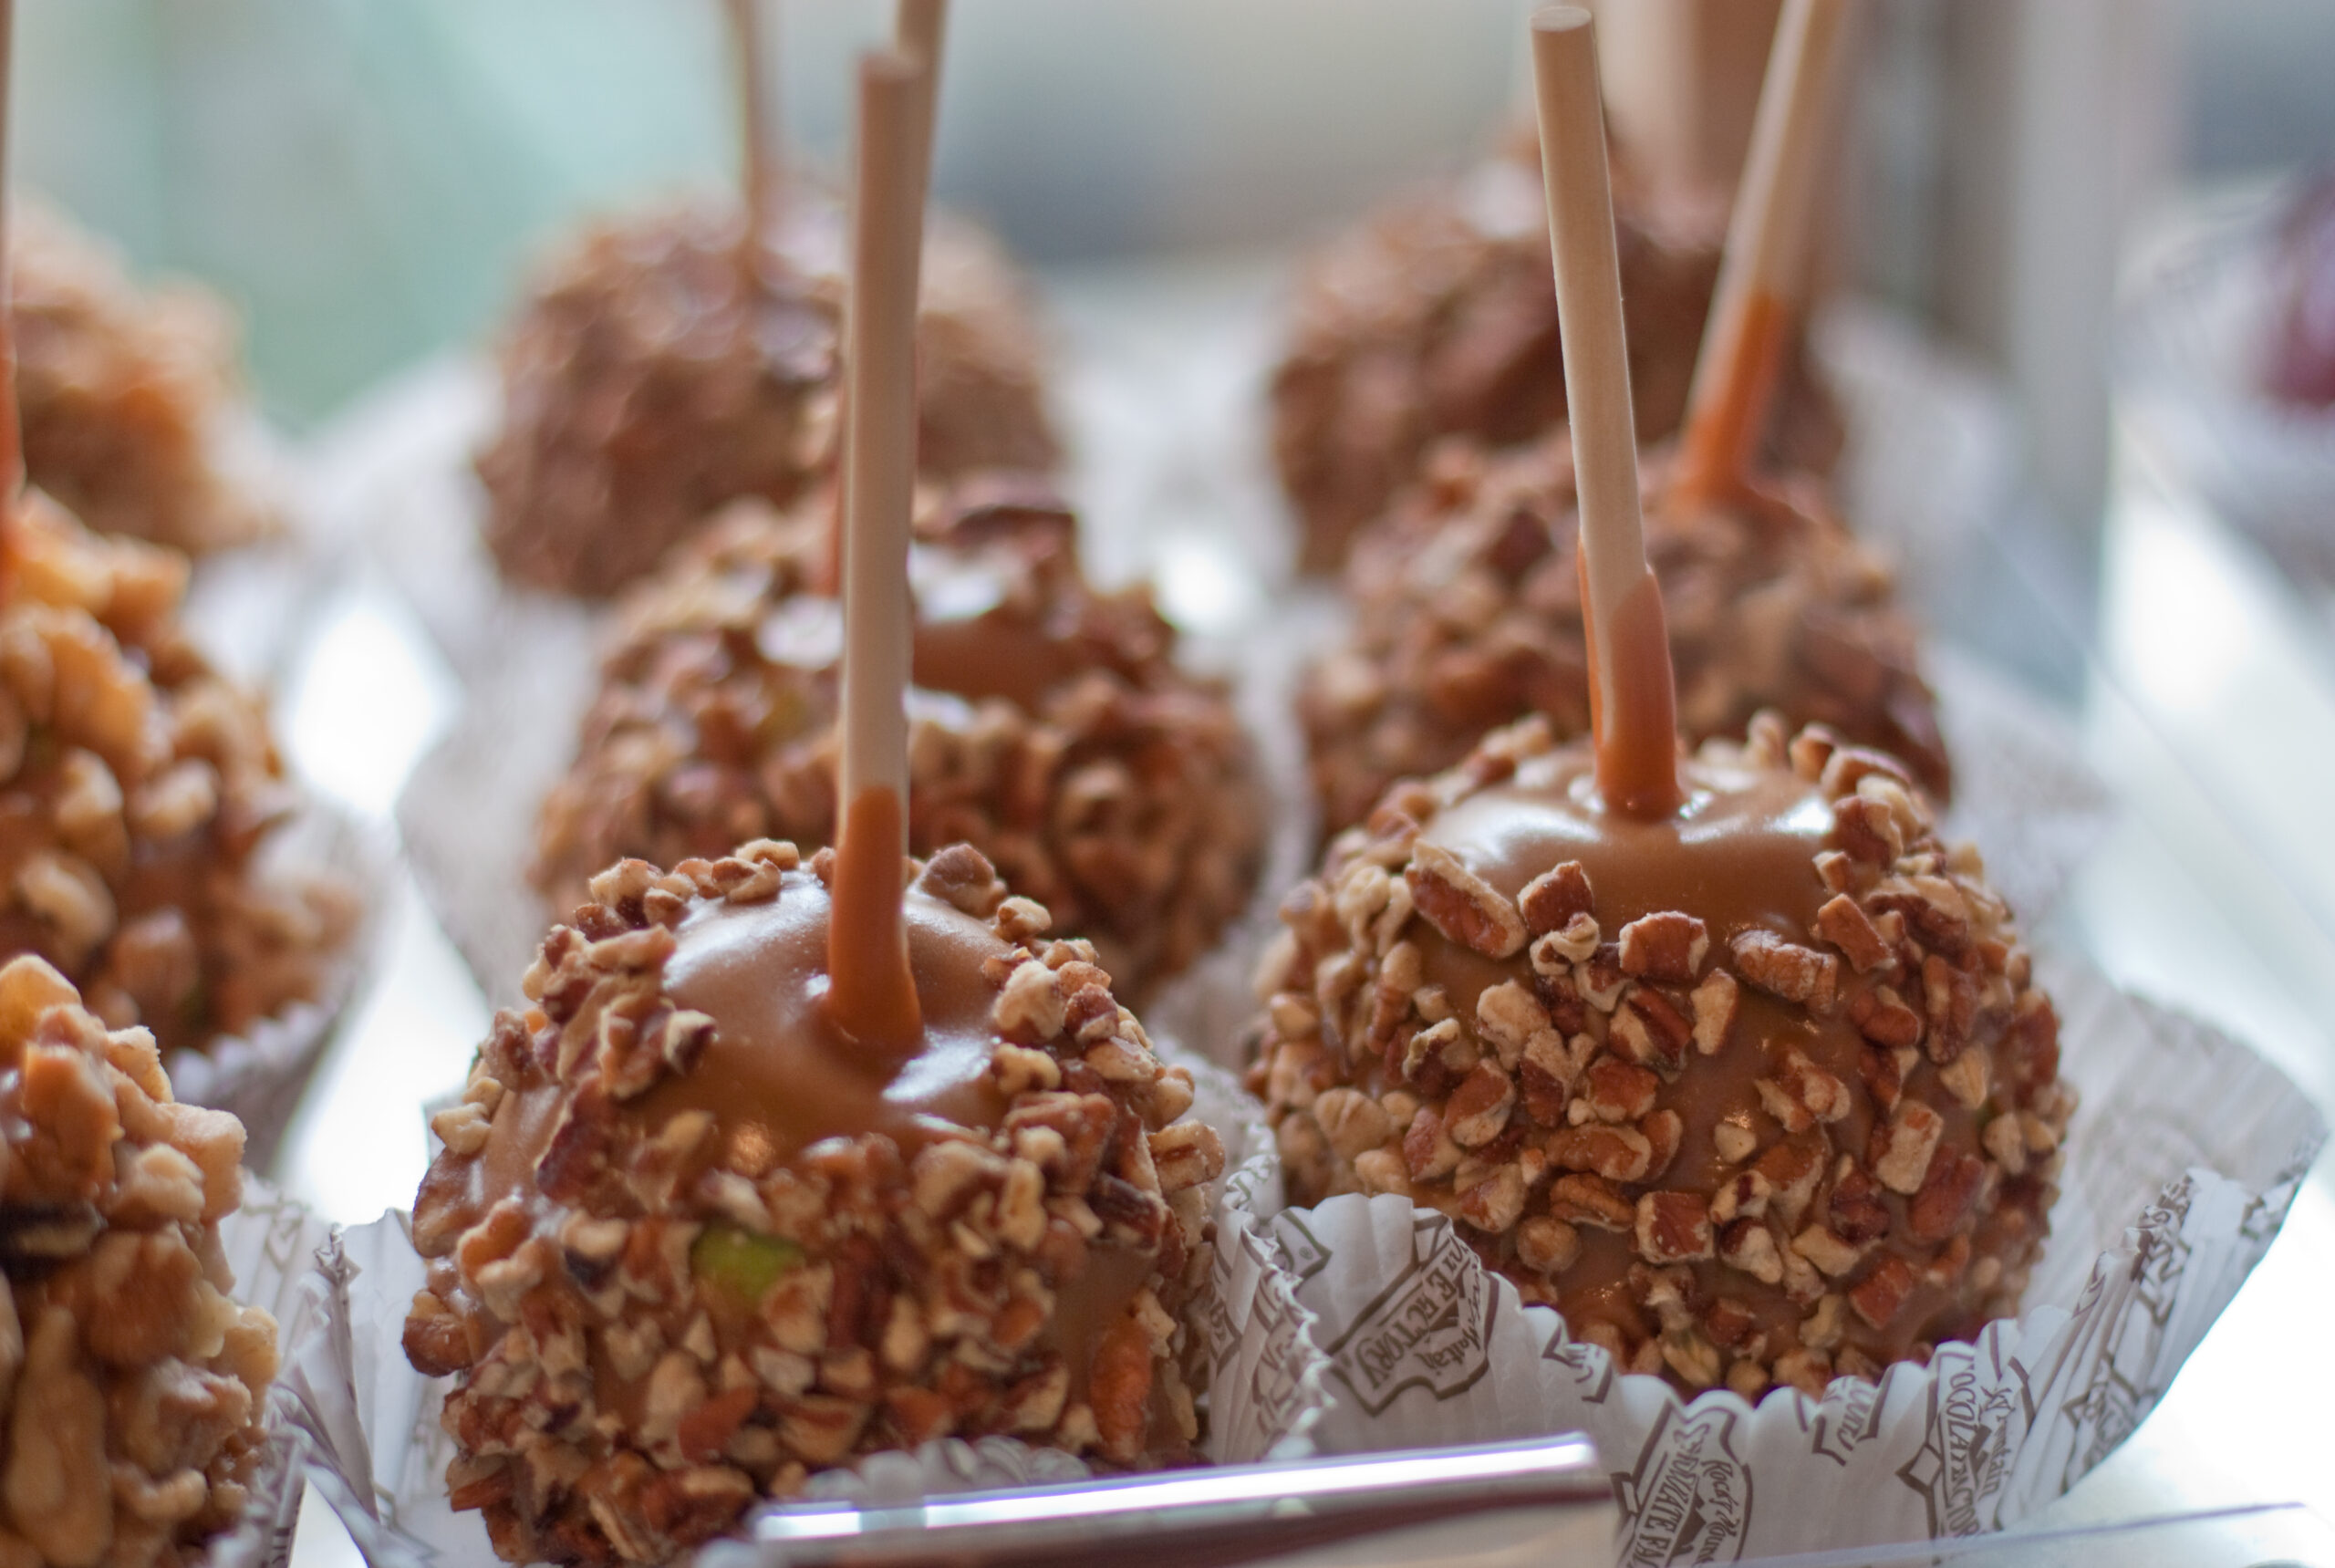 Caramel Apples Can Give You Food Poisoning